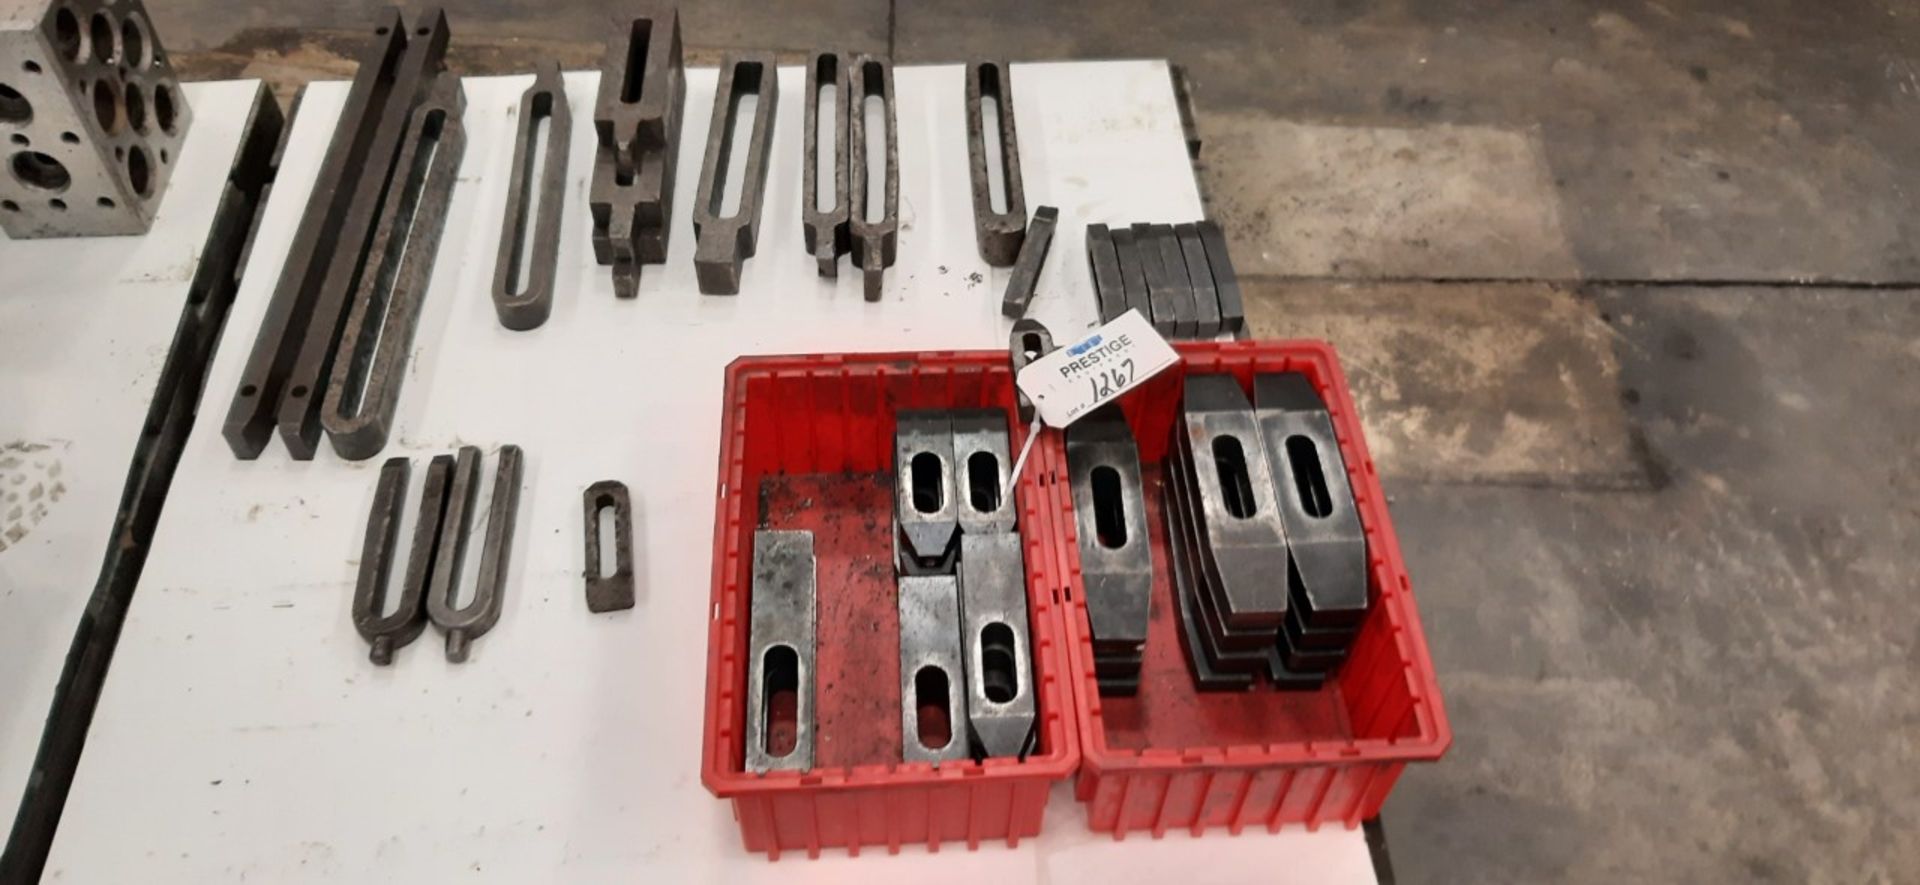 Lot-Setup Clamps in (2) Red Totes and Loose, (Bldg 3)